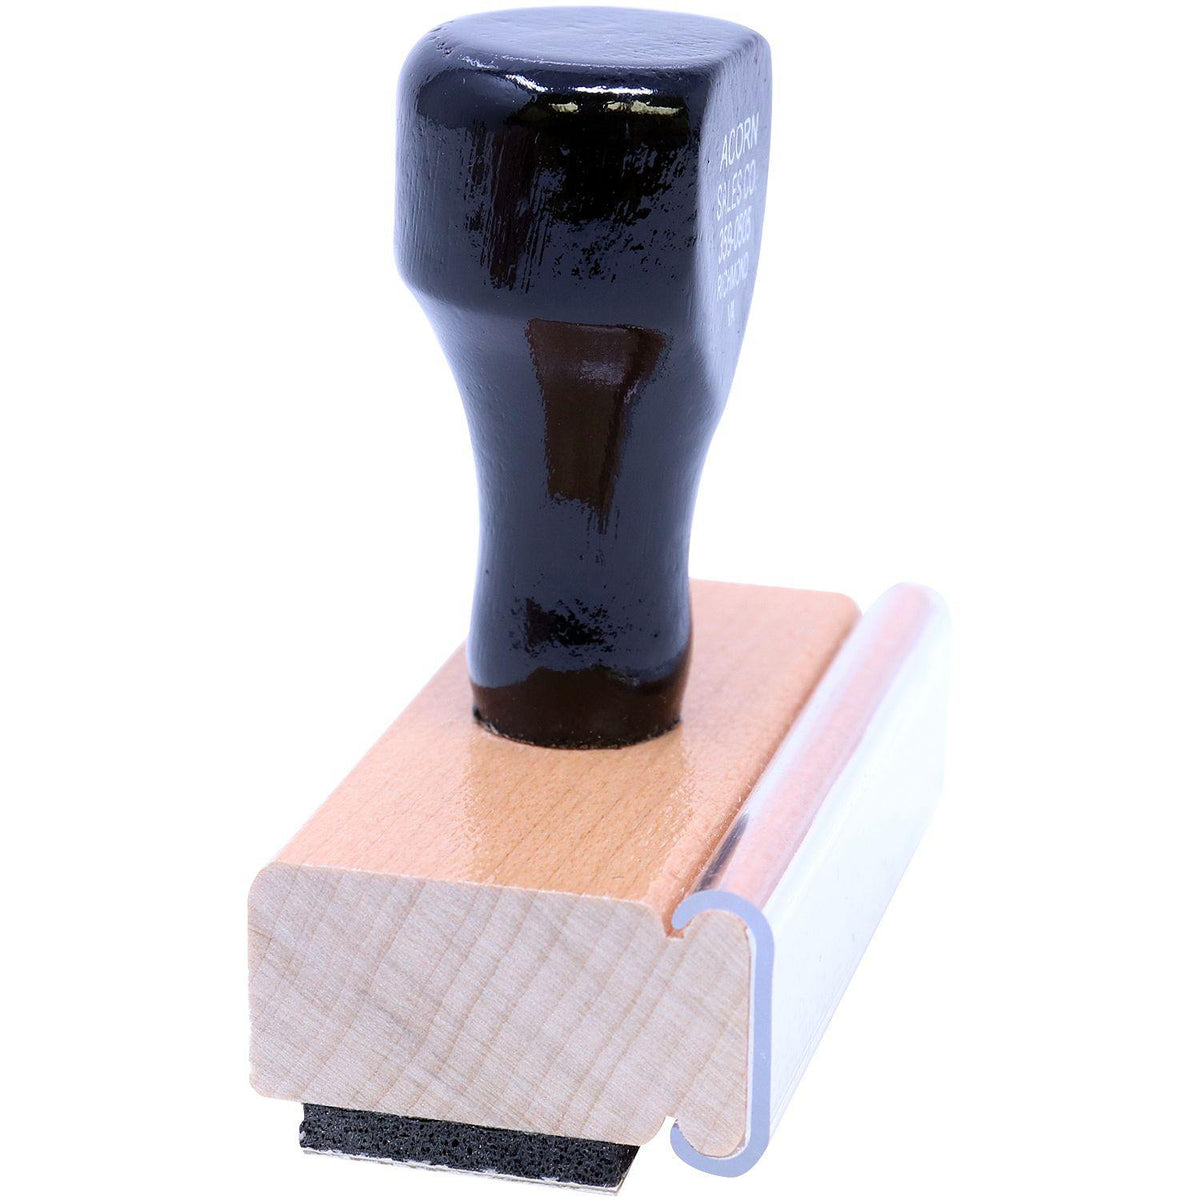 Side View of Large Narrow For Deposit Only Rubber Stamp at an Angle